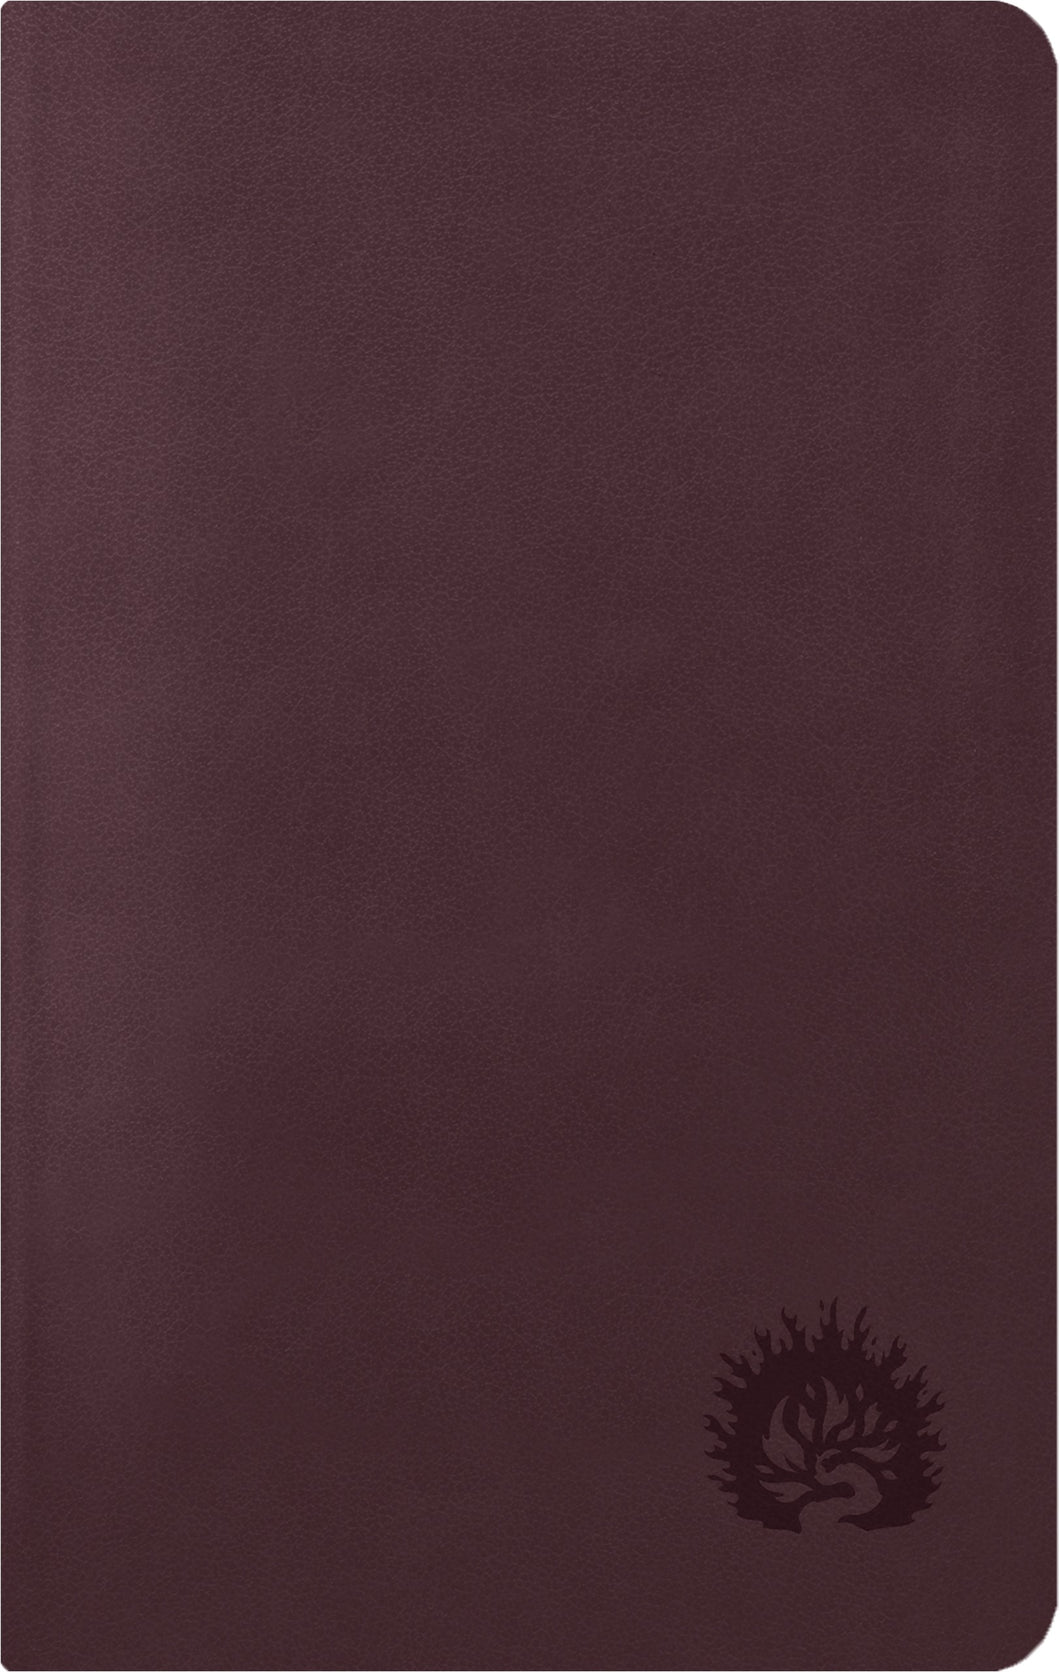 ESV Reformation Study Bible: Condensed Edition-Plum Leather-Like